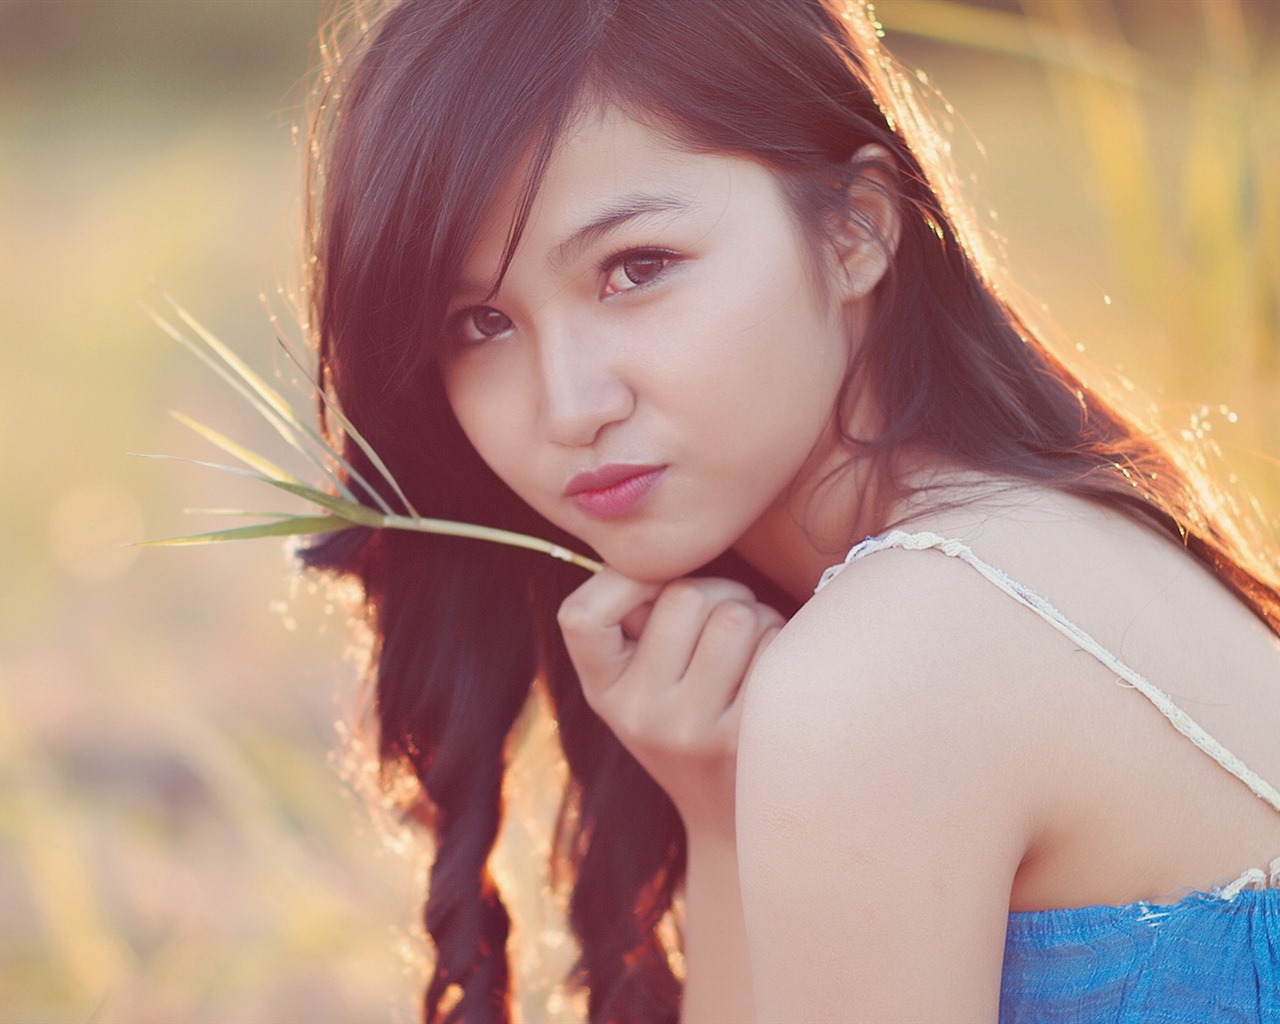 Pure and lovely young Asian girl HD wallpapers collection (5) #35 - 1280x1024